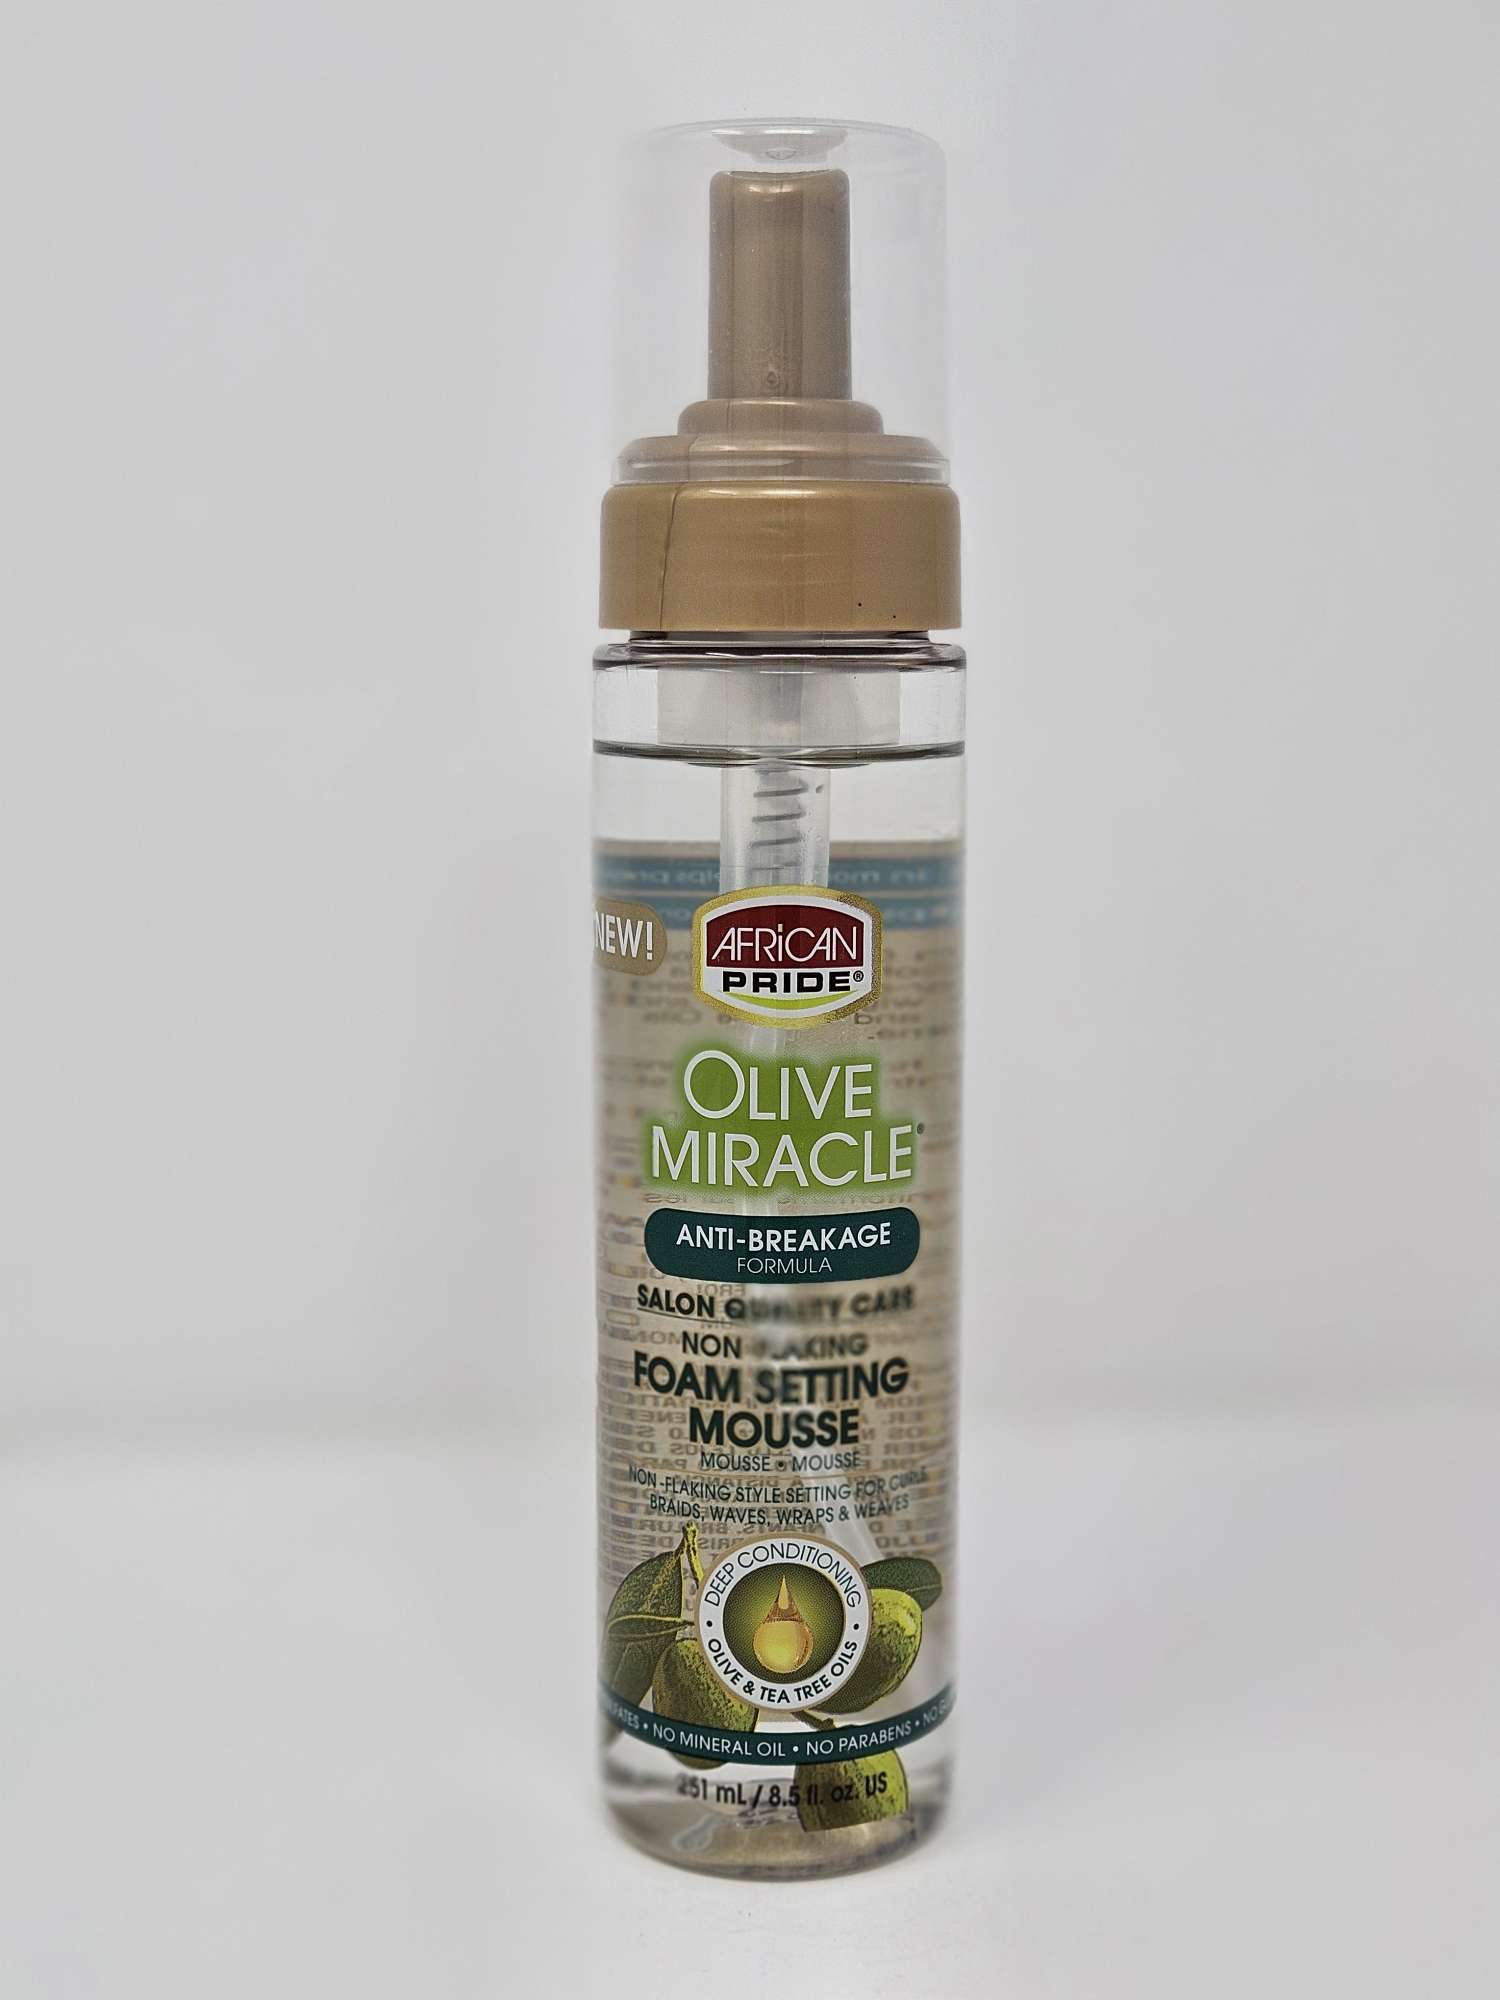 African Pride Olive Miracle Non Flaking Foam Setting Mousse - 8.5oz